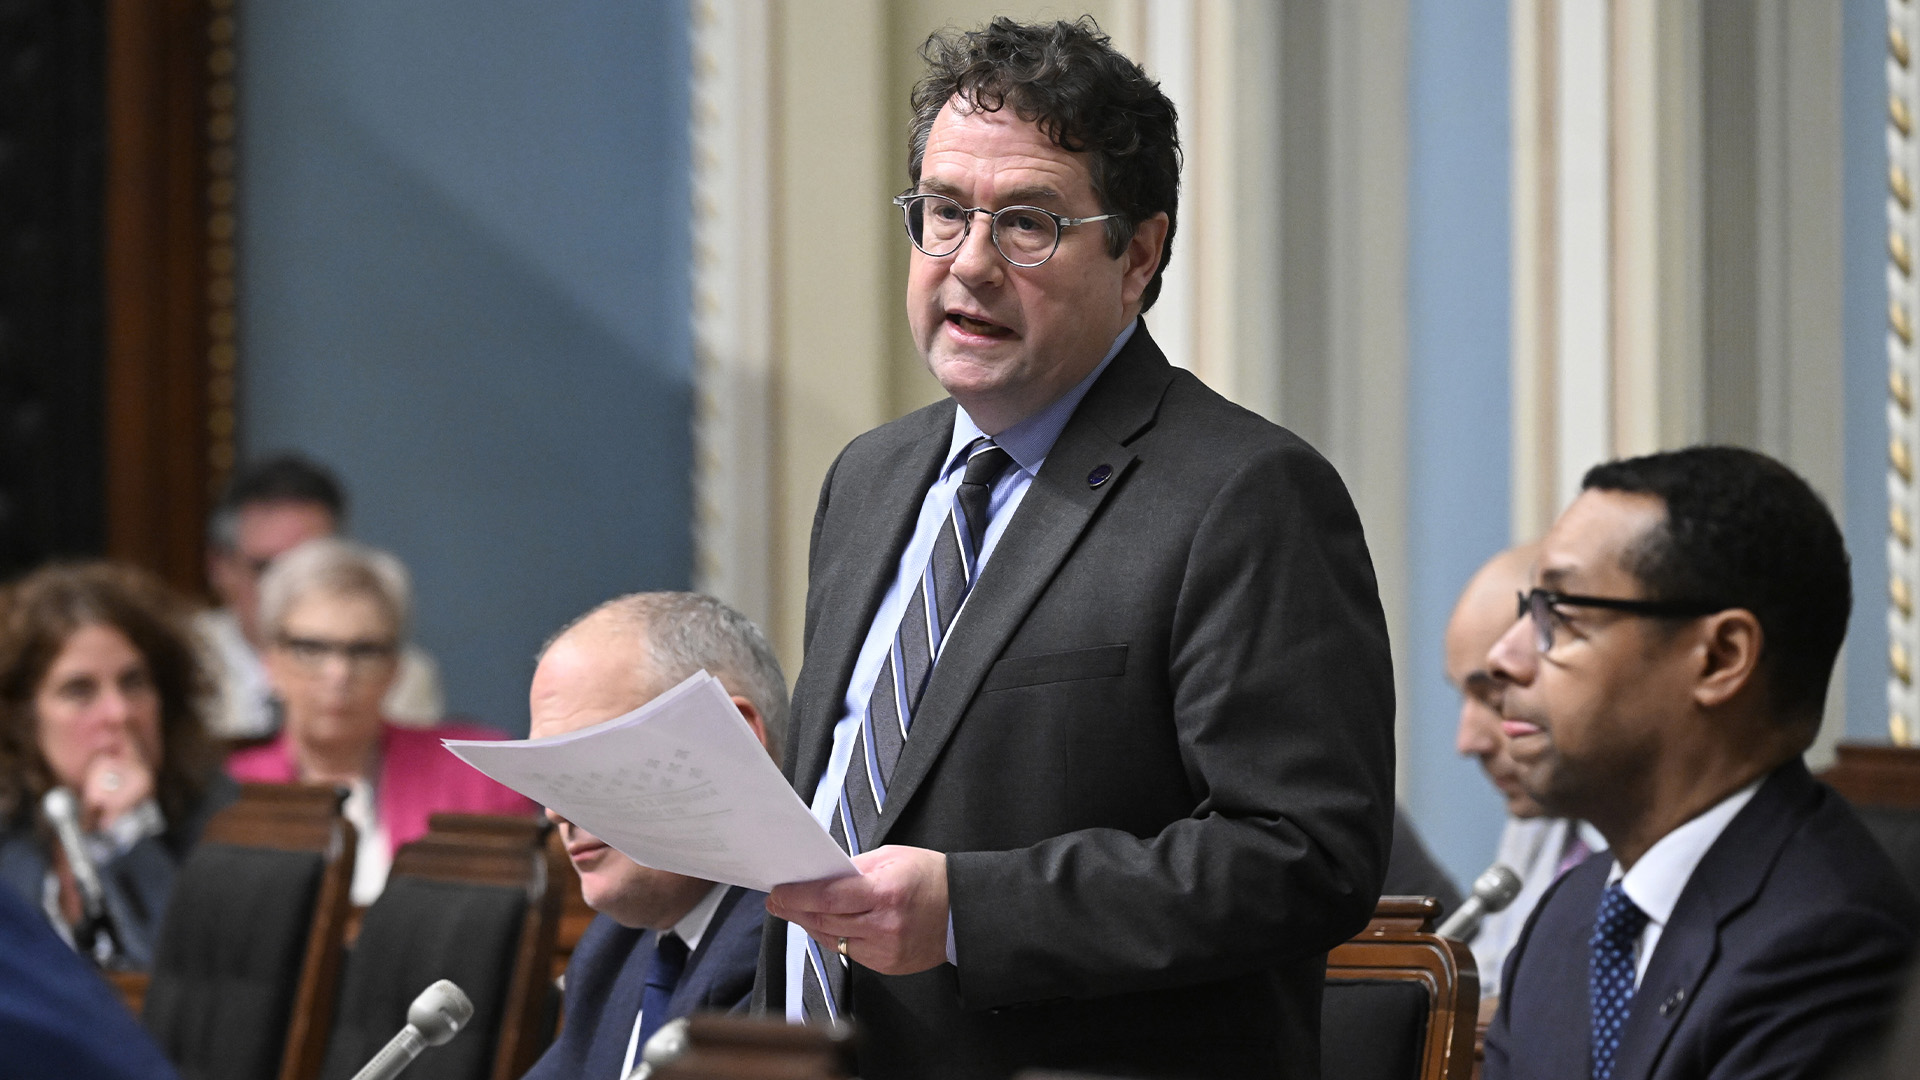 “Orientation conflicts with the flag”: CSQ reacts to Drainville mini fix